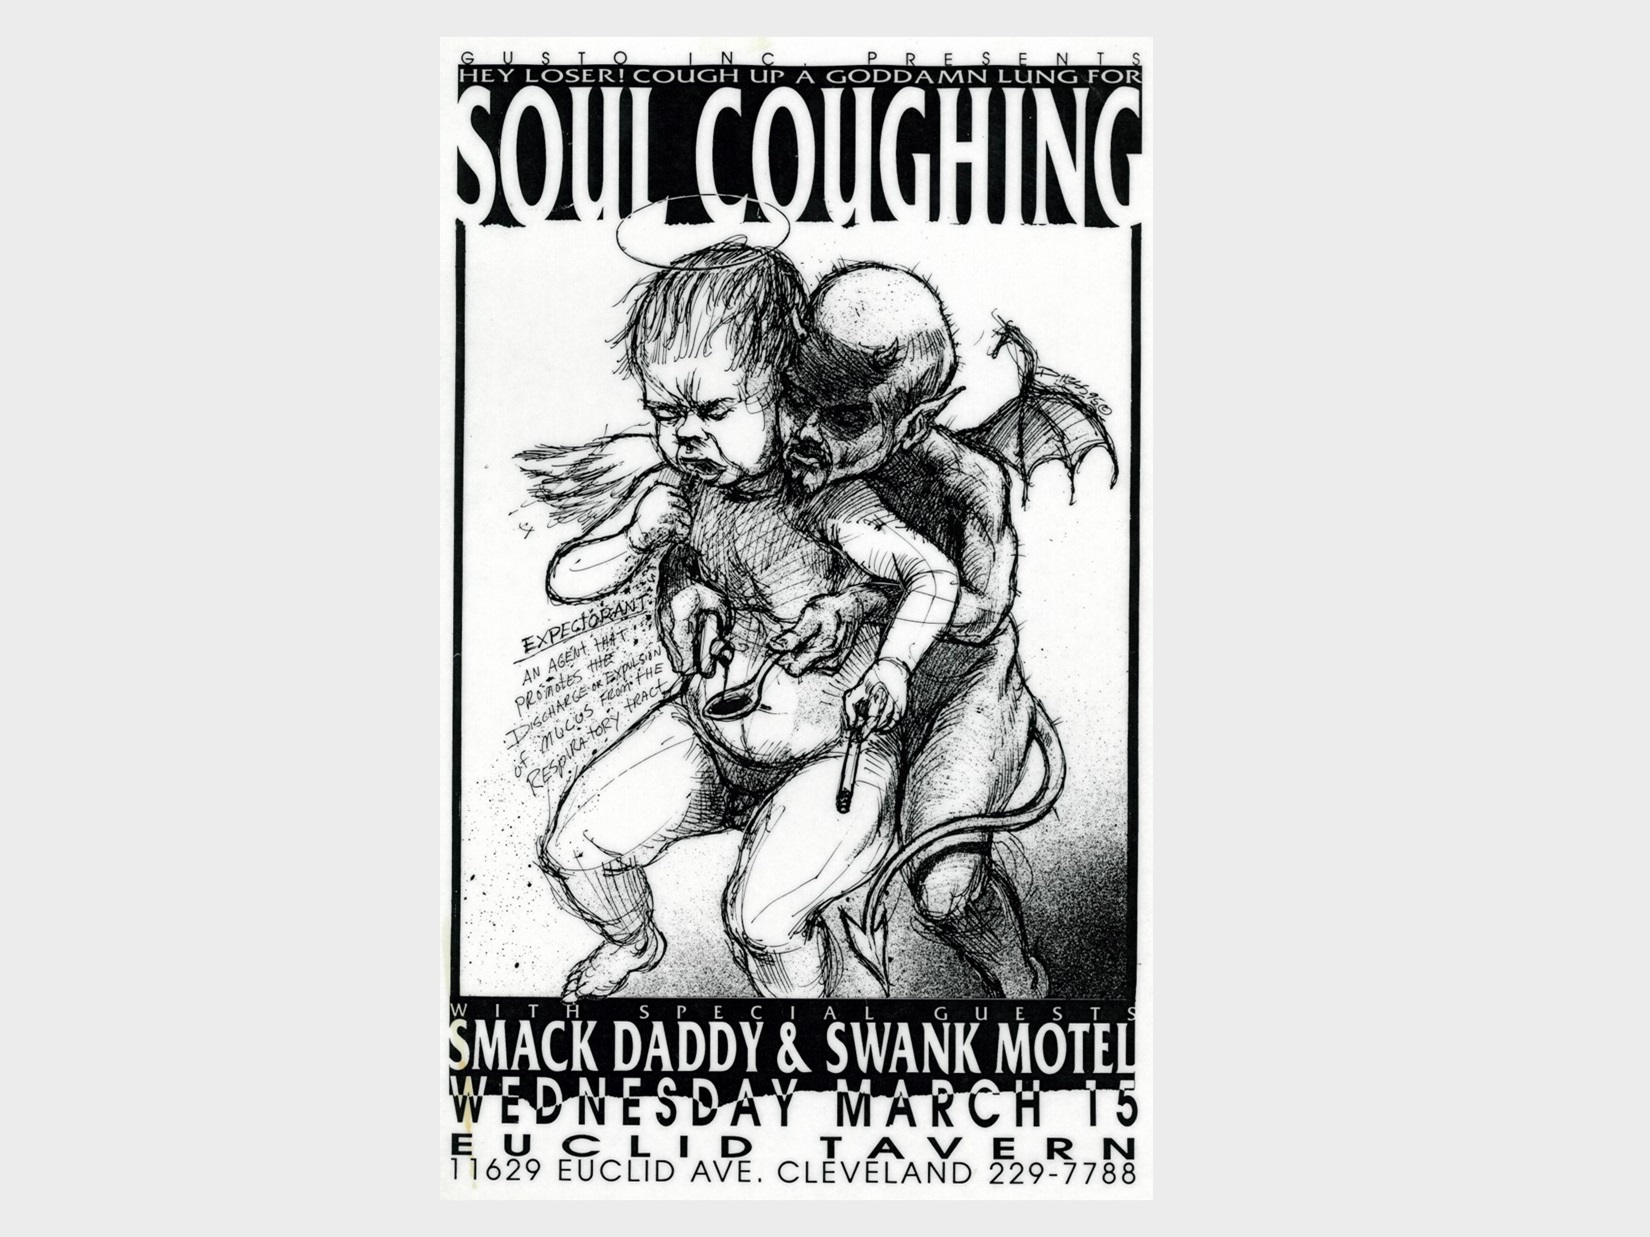 Buddy Love with Swank Motel at Soul Coughing in 1995